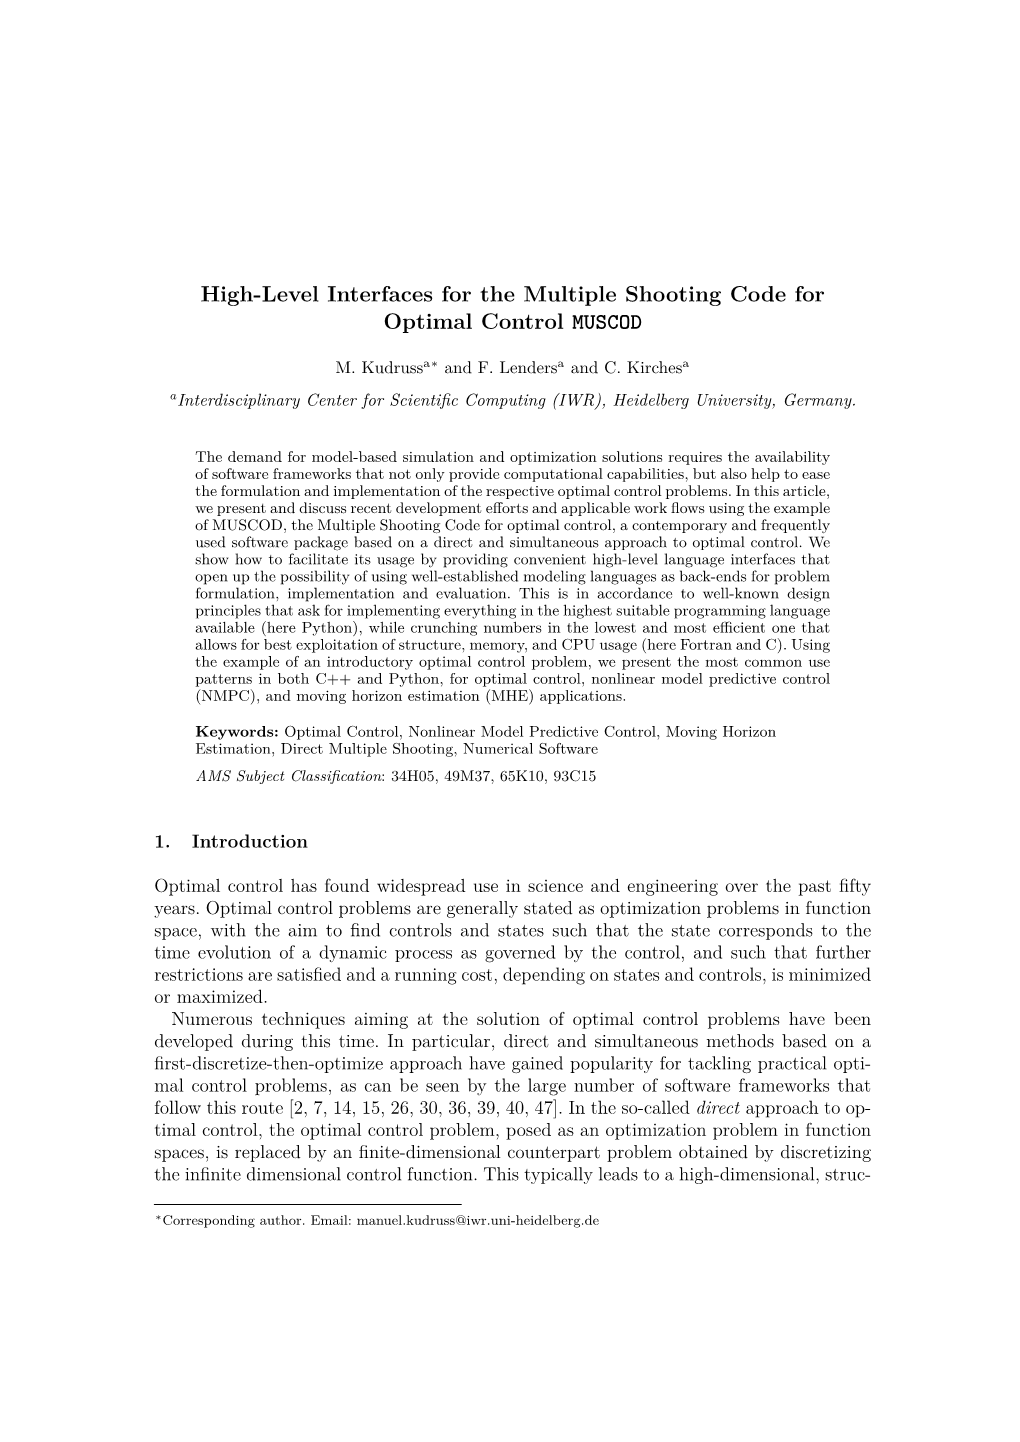 High-Level Interfaces for the Multiple Shooting Code for Optimal Control MUSCOD